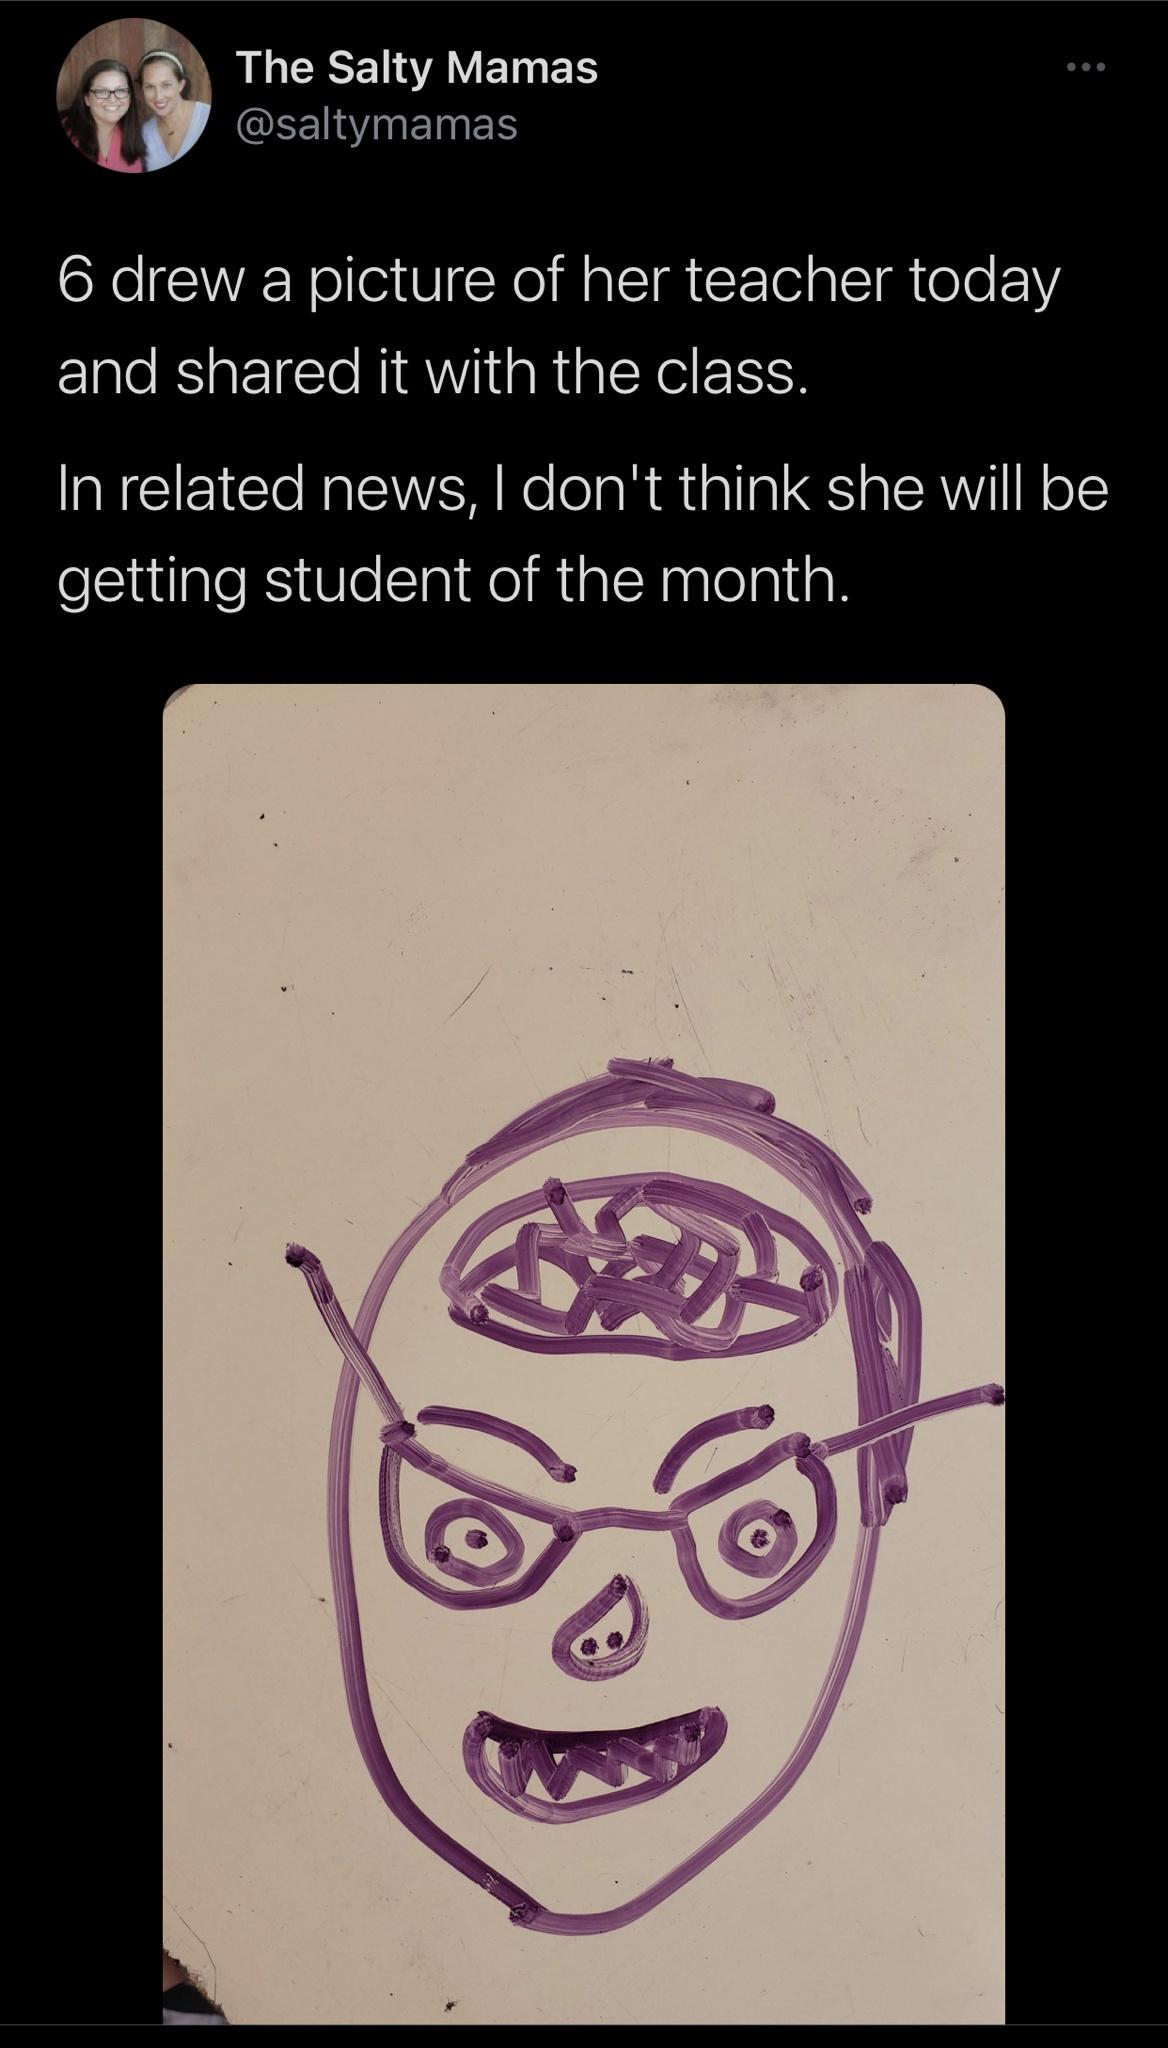 the funniest tweets - cartoon - The Salty Mamas 6 drew a picture of her teacher today and d it with the class. In related news, I don't think she will be getting student of the month.